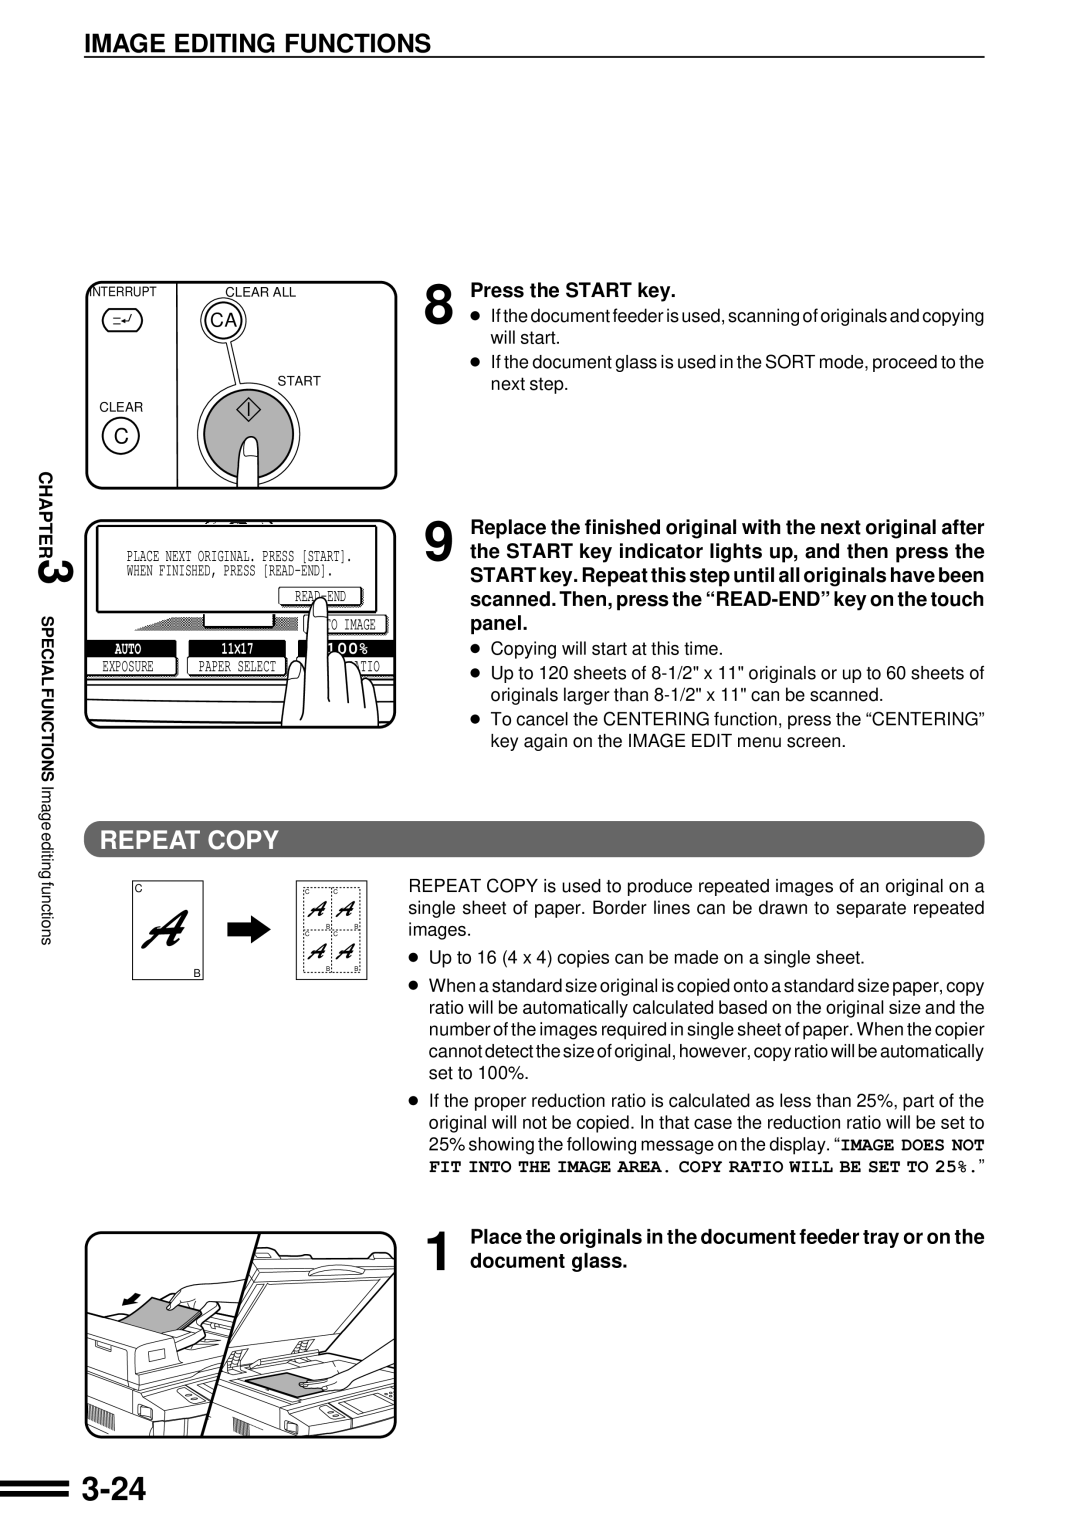 Sharp AR-287 manual 3-24, Repeat Copy, Press the START key, Replace the finished original with the next original after 